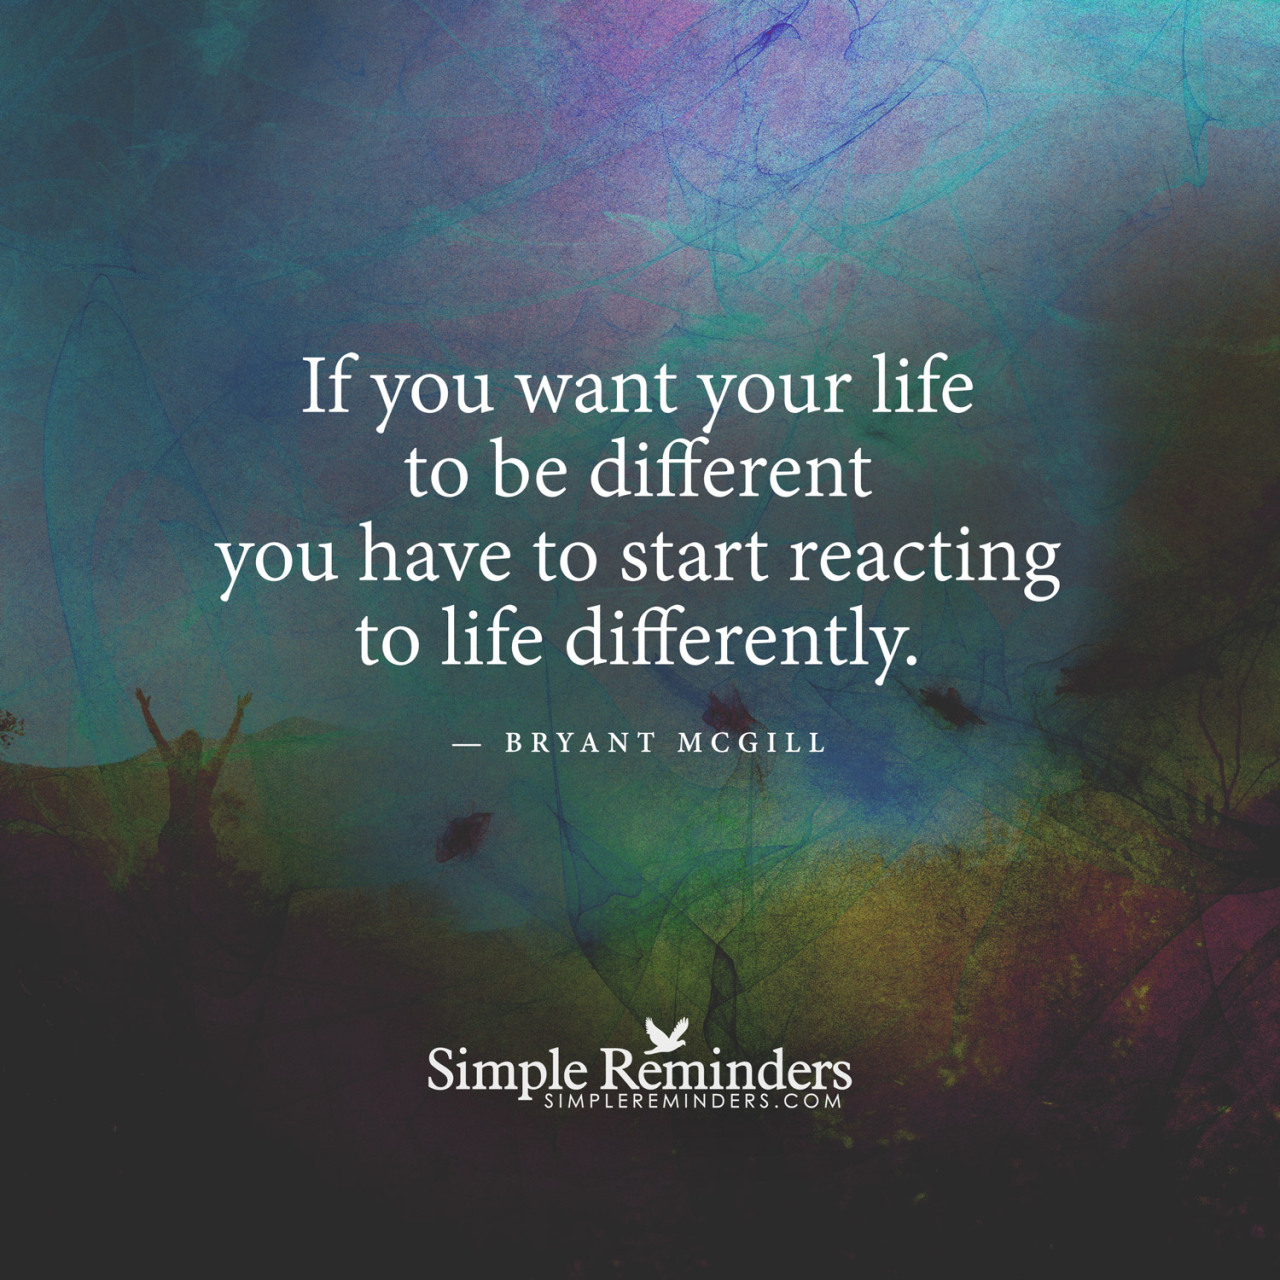 mysimplereminders:“If you want your life to be different you have to start reacting